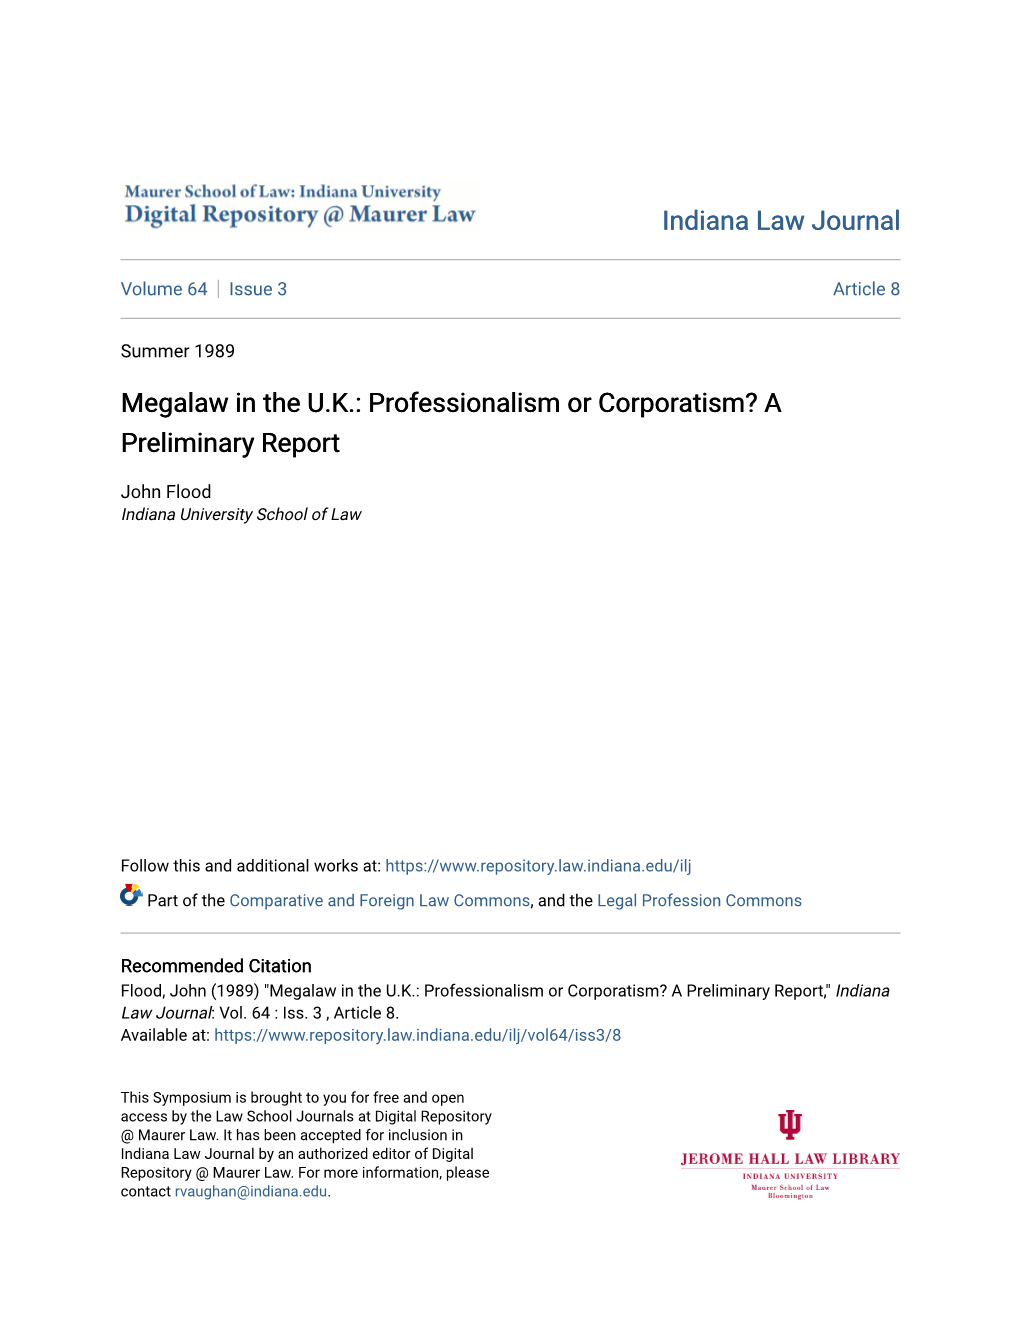 Megalaw in the U.K.: Professionalism Or Corporatism? a Preliminary Report